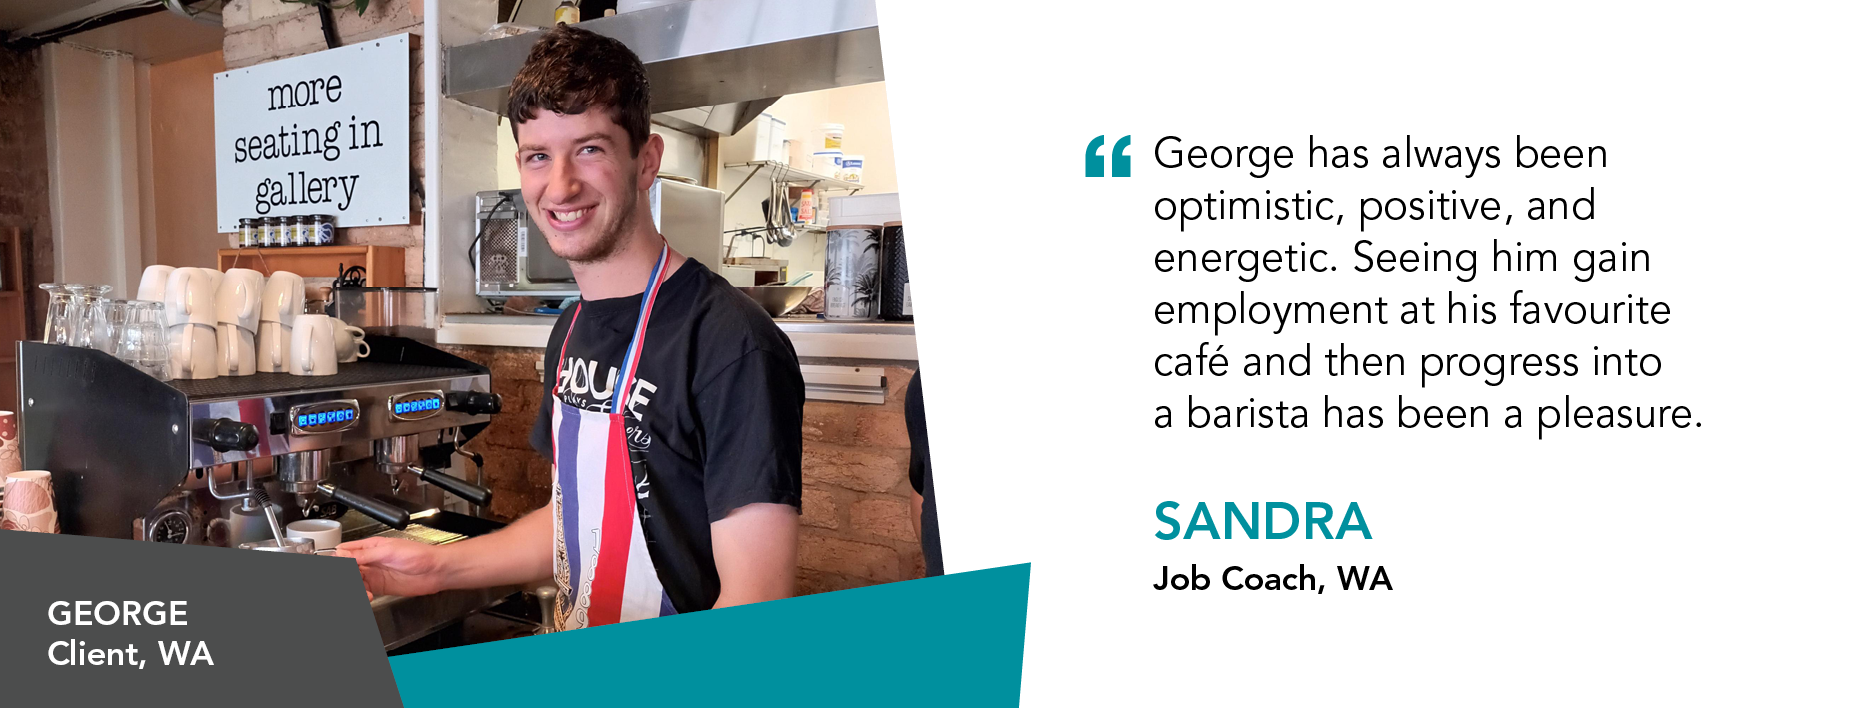 George has always been optimistic, positive, and energetic. Seeing him gain employment at his favourite cafe and then progress into a barista has been a pleasure.' said Sandra, Job Coach Western Australia